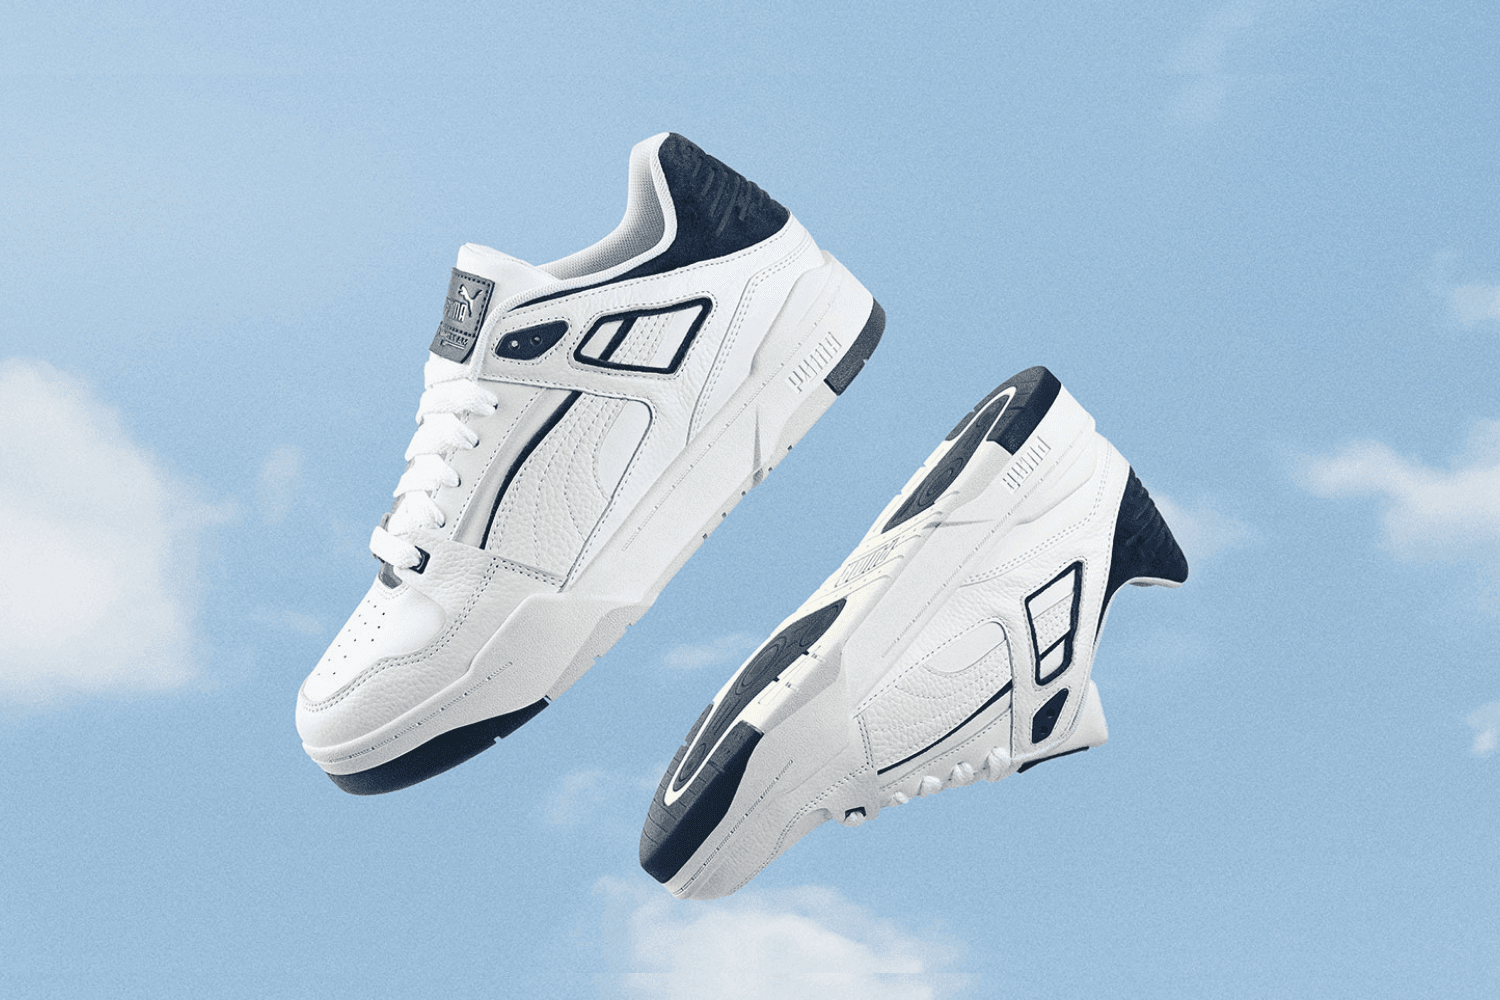 The Slipstream by PUMA is now available in these new colorways